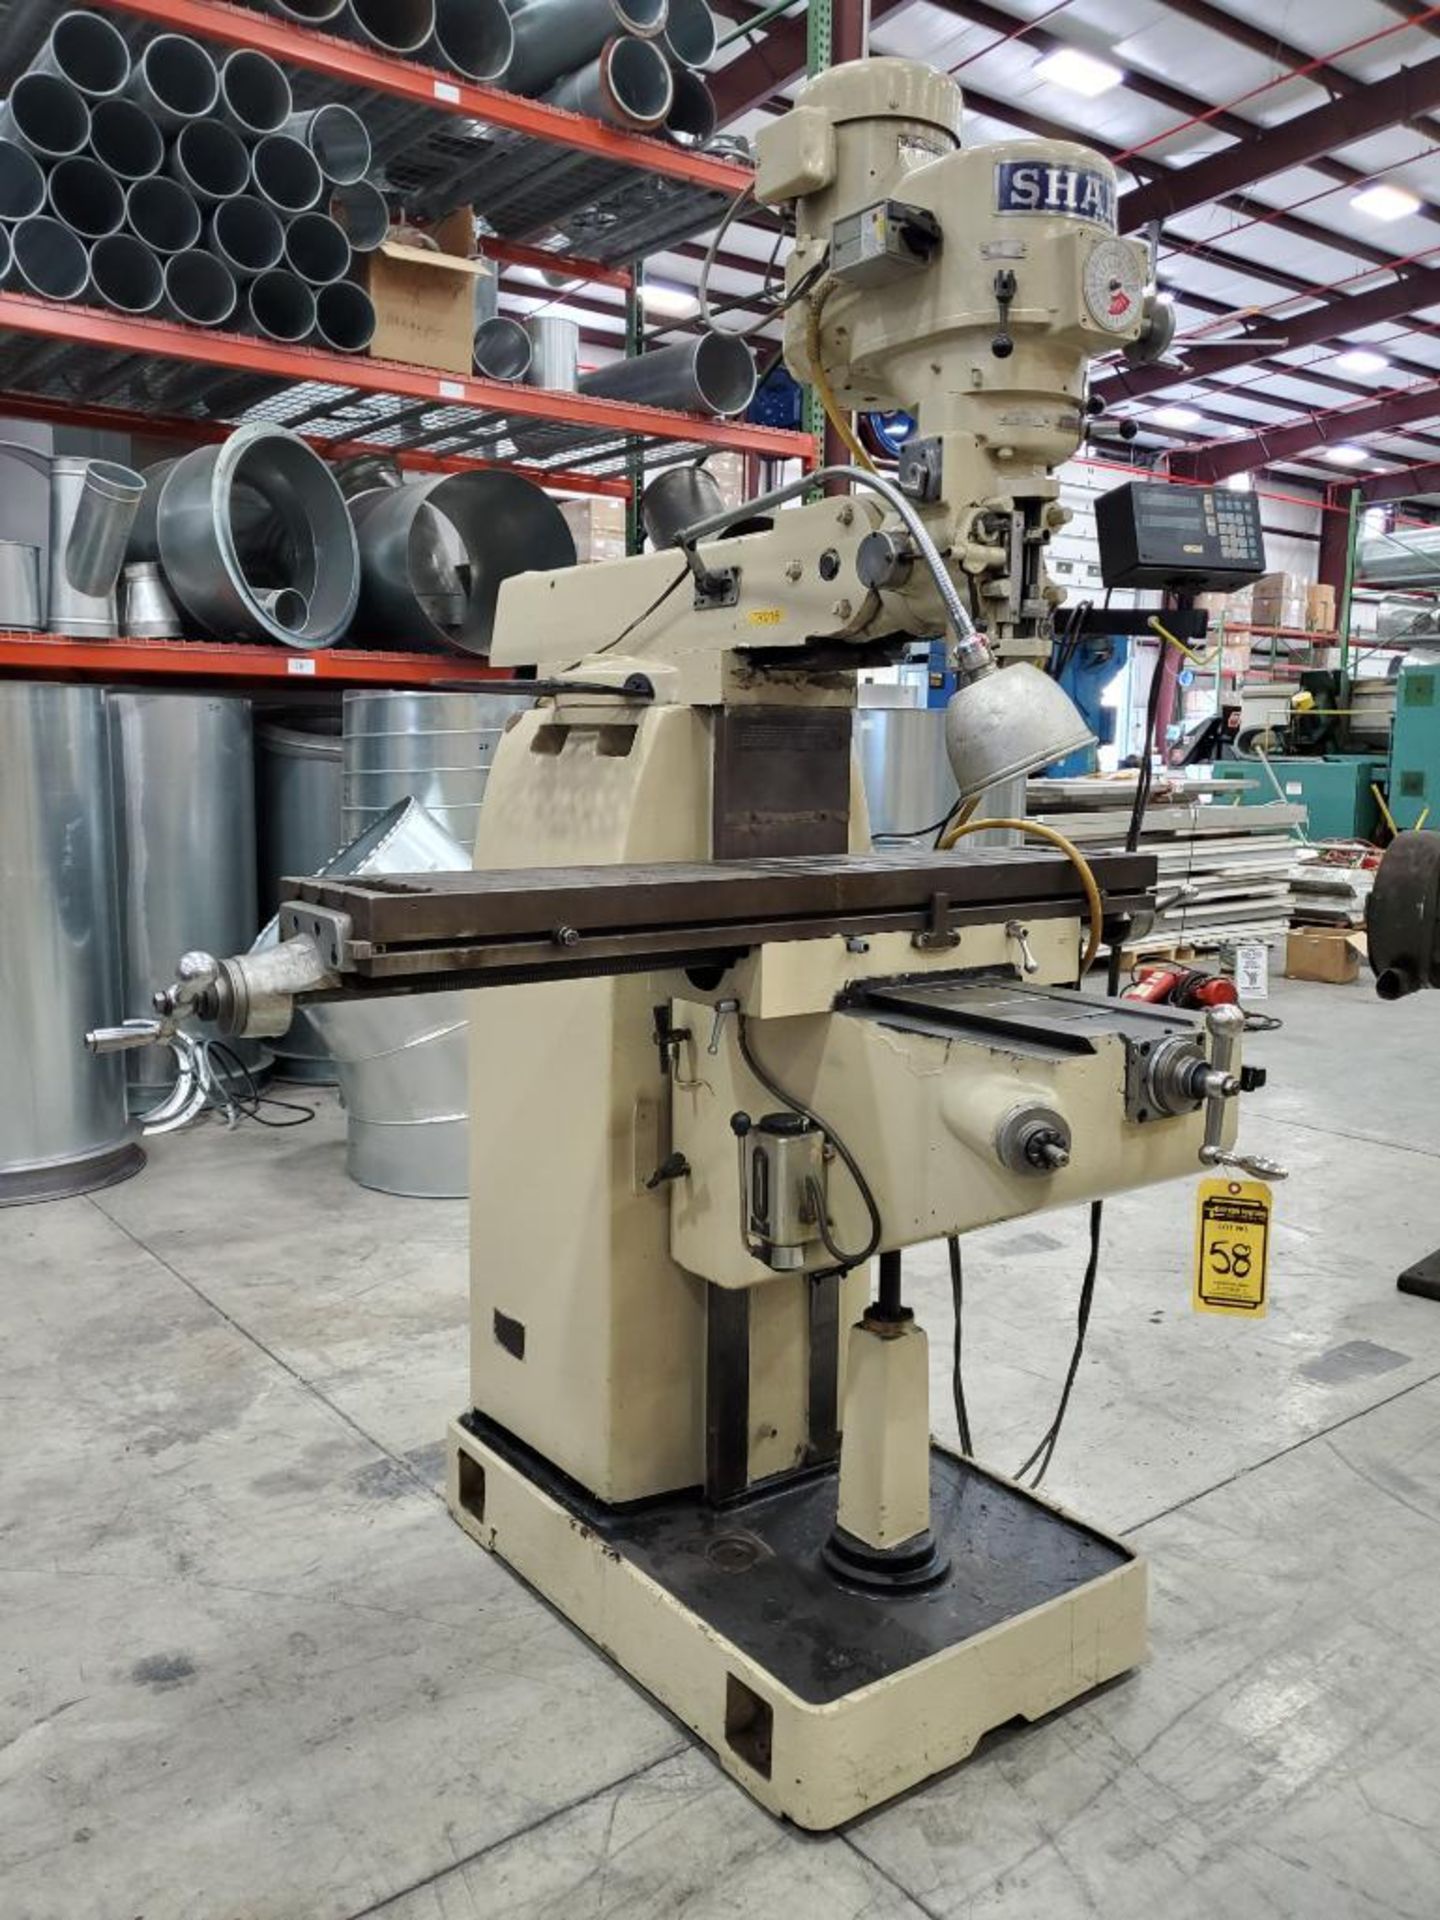 Sharp Vertical Milling Machine, 3 HP, 51" x 10-1/4" Table, Millman LH51 2-Axis Control, Knee Bed, 5"